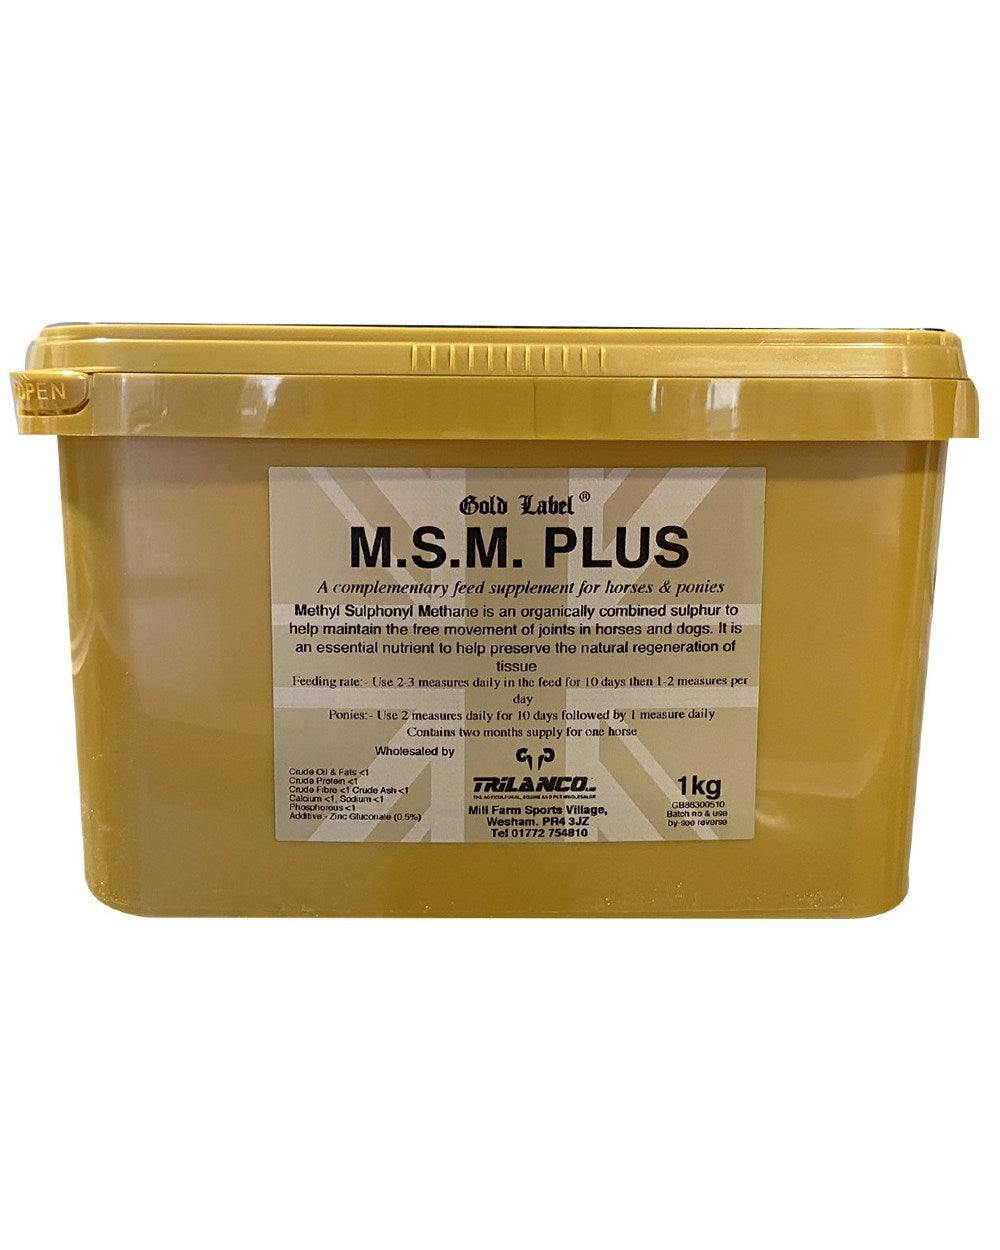 Gold Label M.S.M. Plus On A White Background